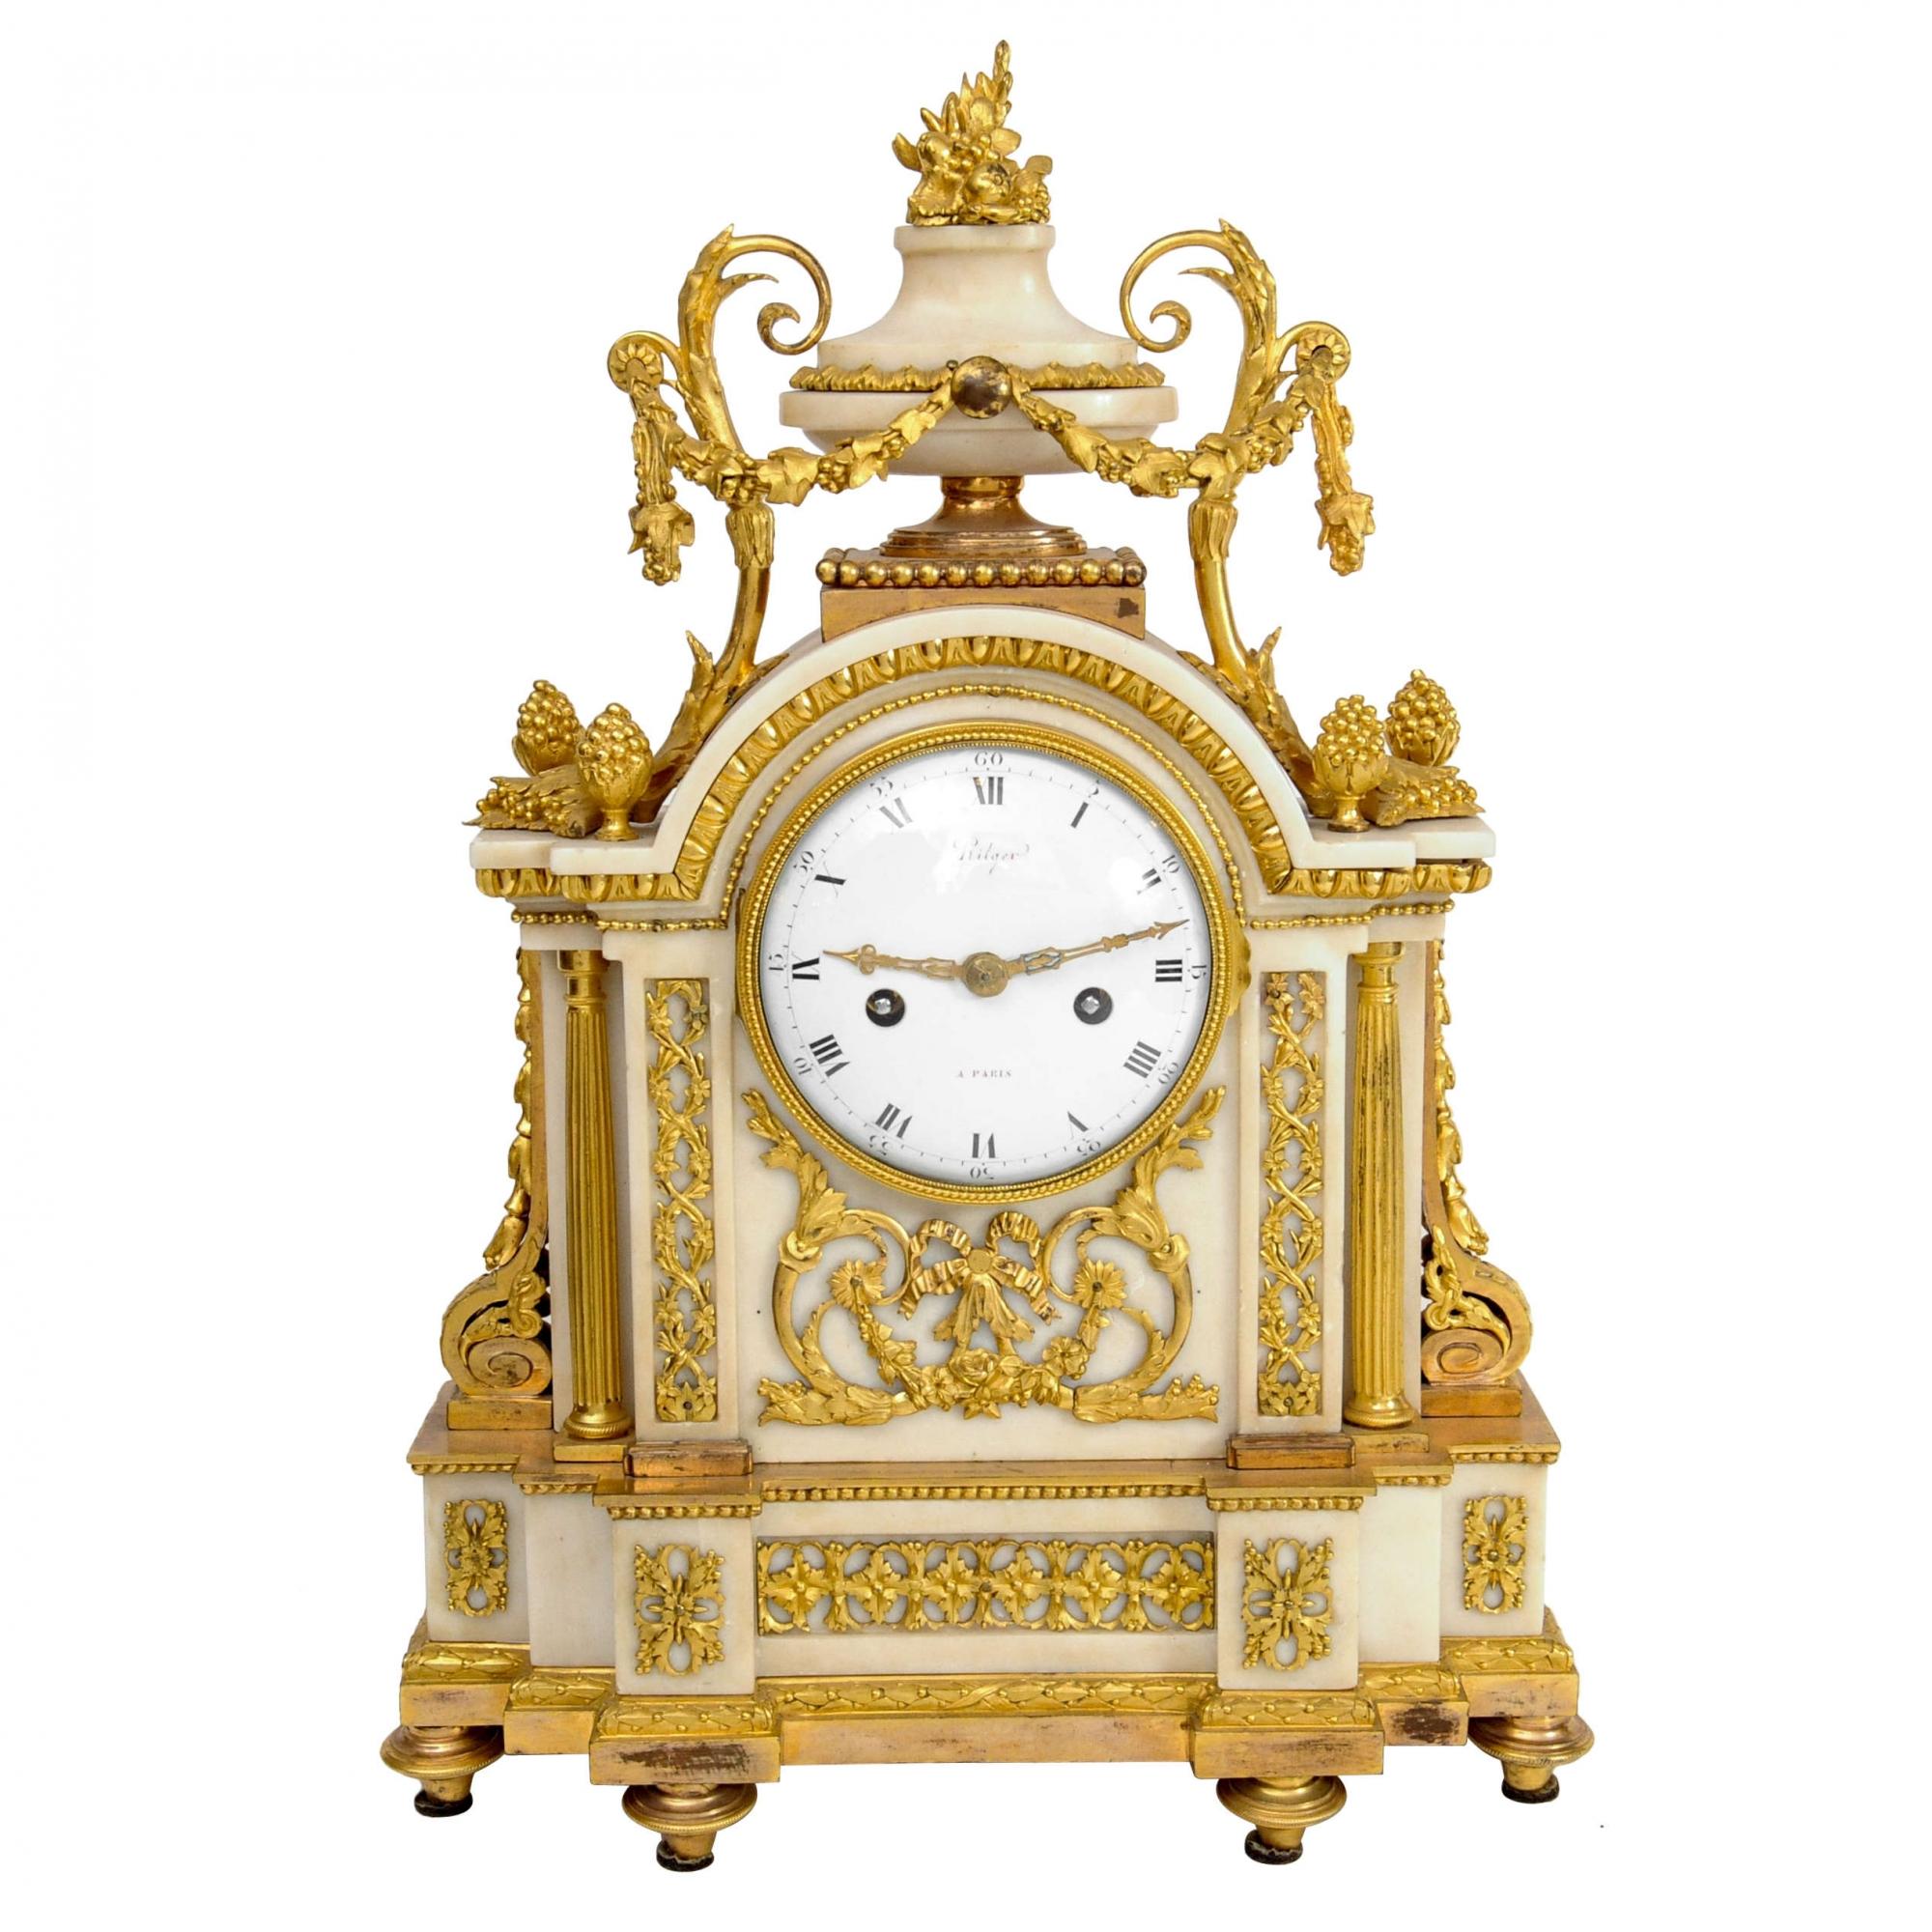 French Louis XVI Ormolu-Mounted Marble Mantel Clock, circa 1780. 
Enamel dial with Roman numerals, signed in red 'Hilger A Paris', fine pierced engraved gilt hands, 8-day anchor movement with silk suspended pendulum and countwheel half hour striking